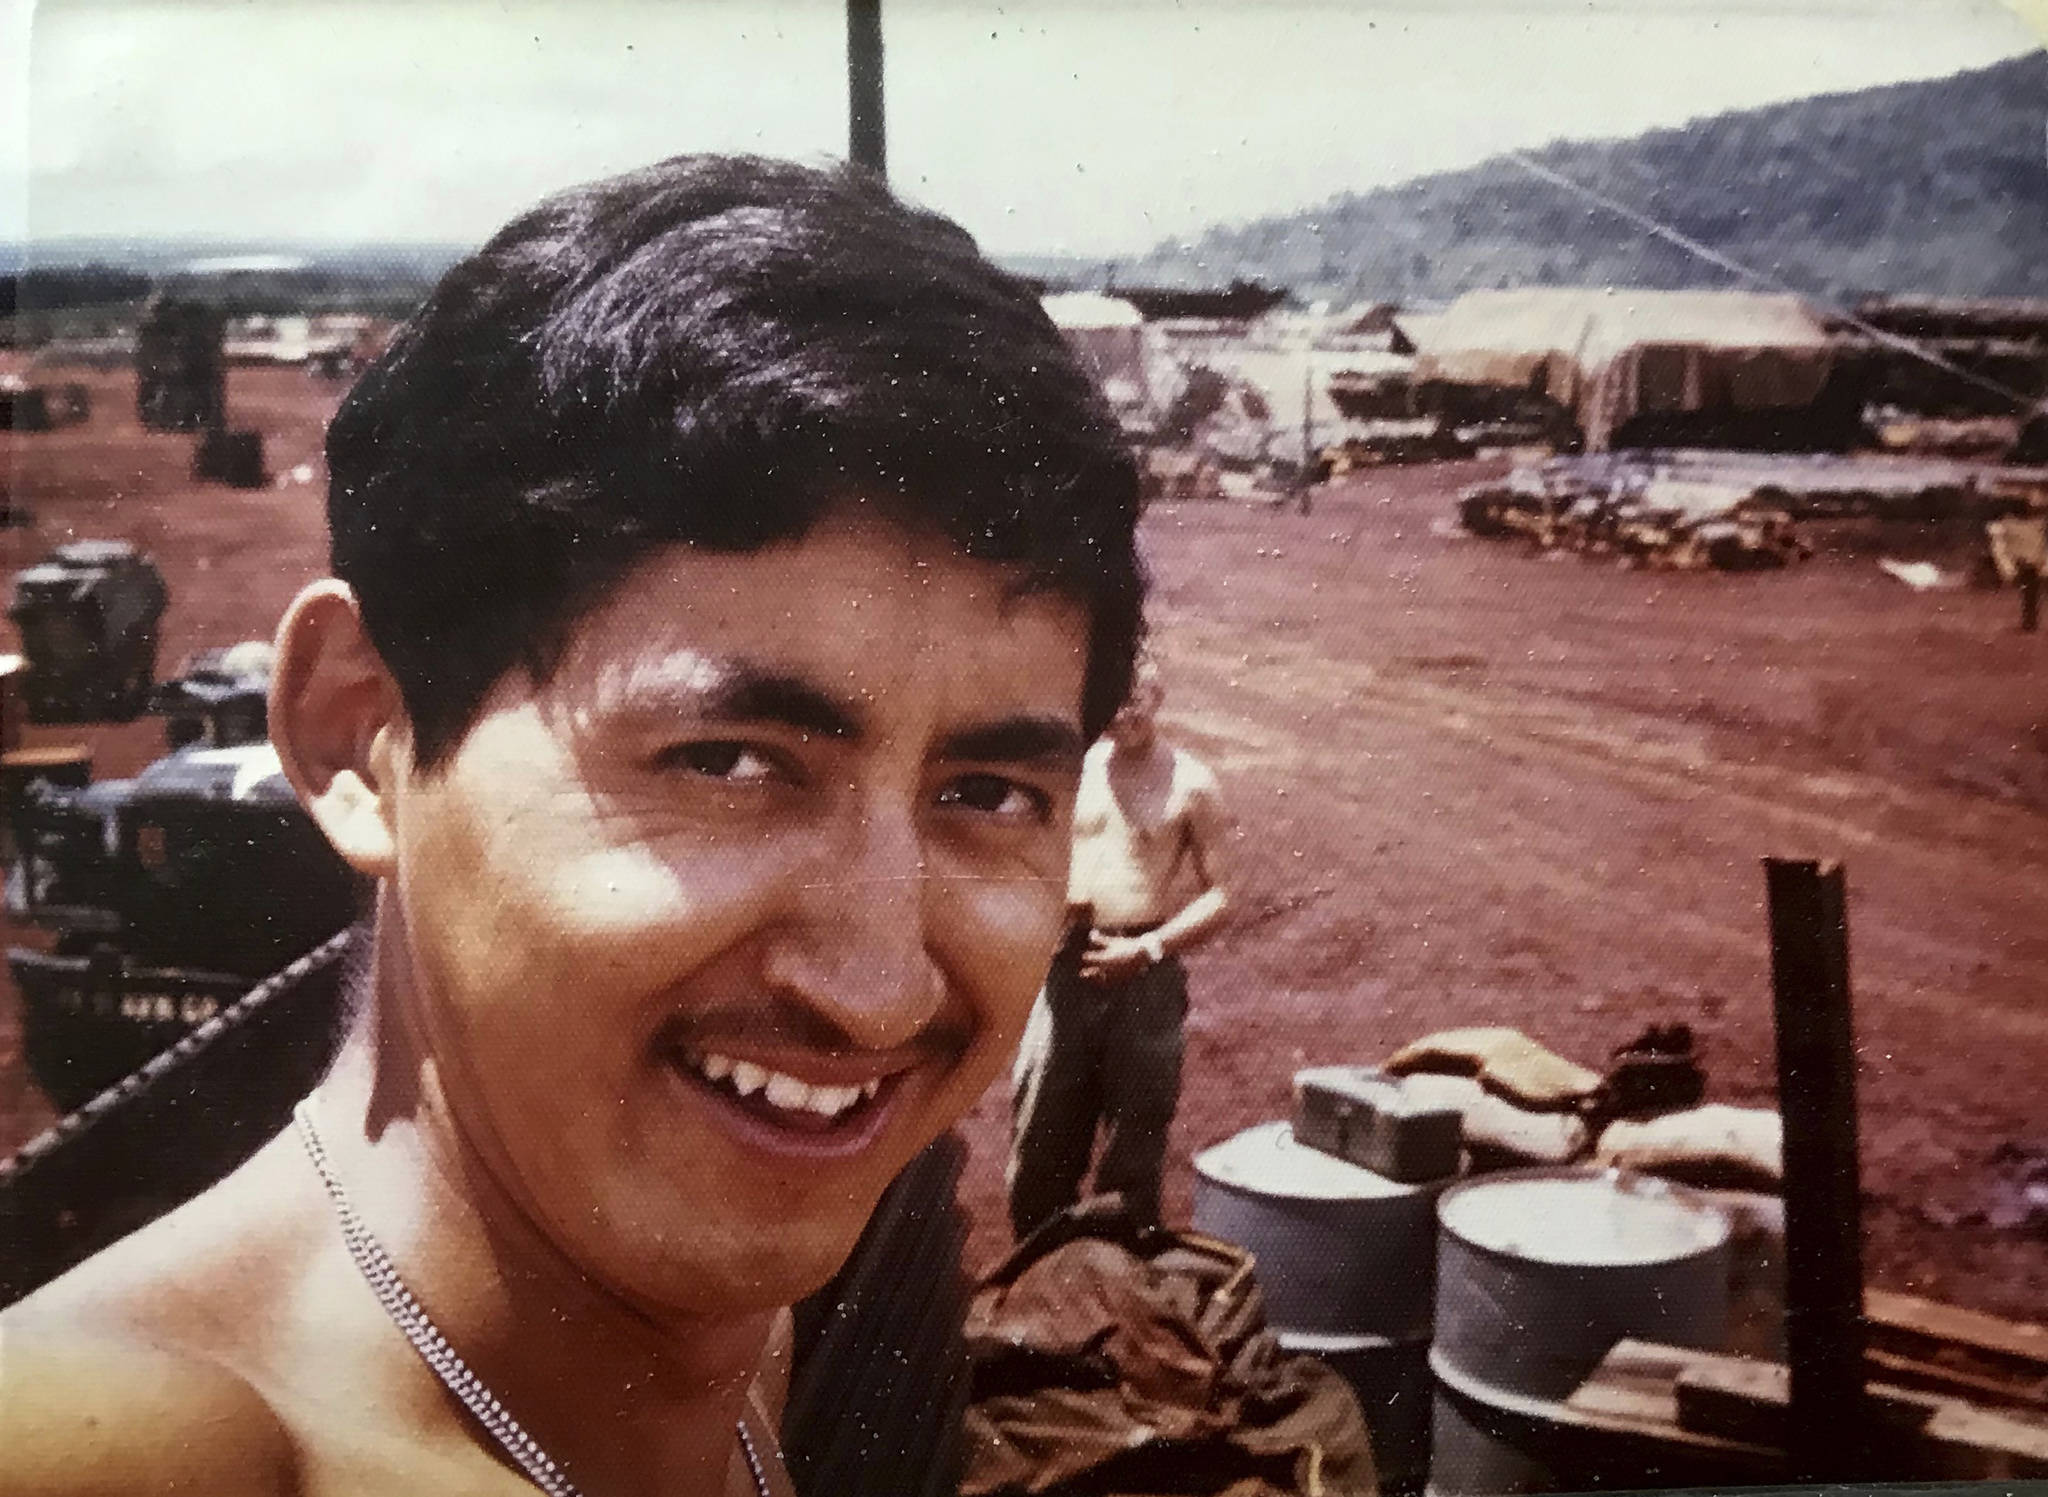 Photo provided by Seeyaa Charpentier                                This undated photo shows Stewy Carlo during his Army service days during the Vietnam War. Carlo died in a car accident in 1975, but his family will apply for an allotment of 160 acres of government-owned land in Alaska under a new program that will allow Alaska Native Vietnam veterans or their heirs to apply for land that they might have missed out on in earlier programs because of their service.